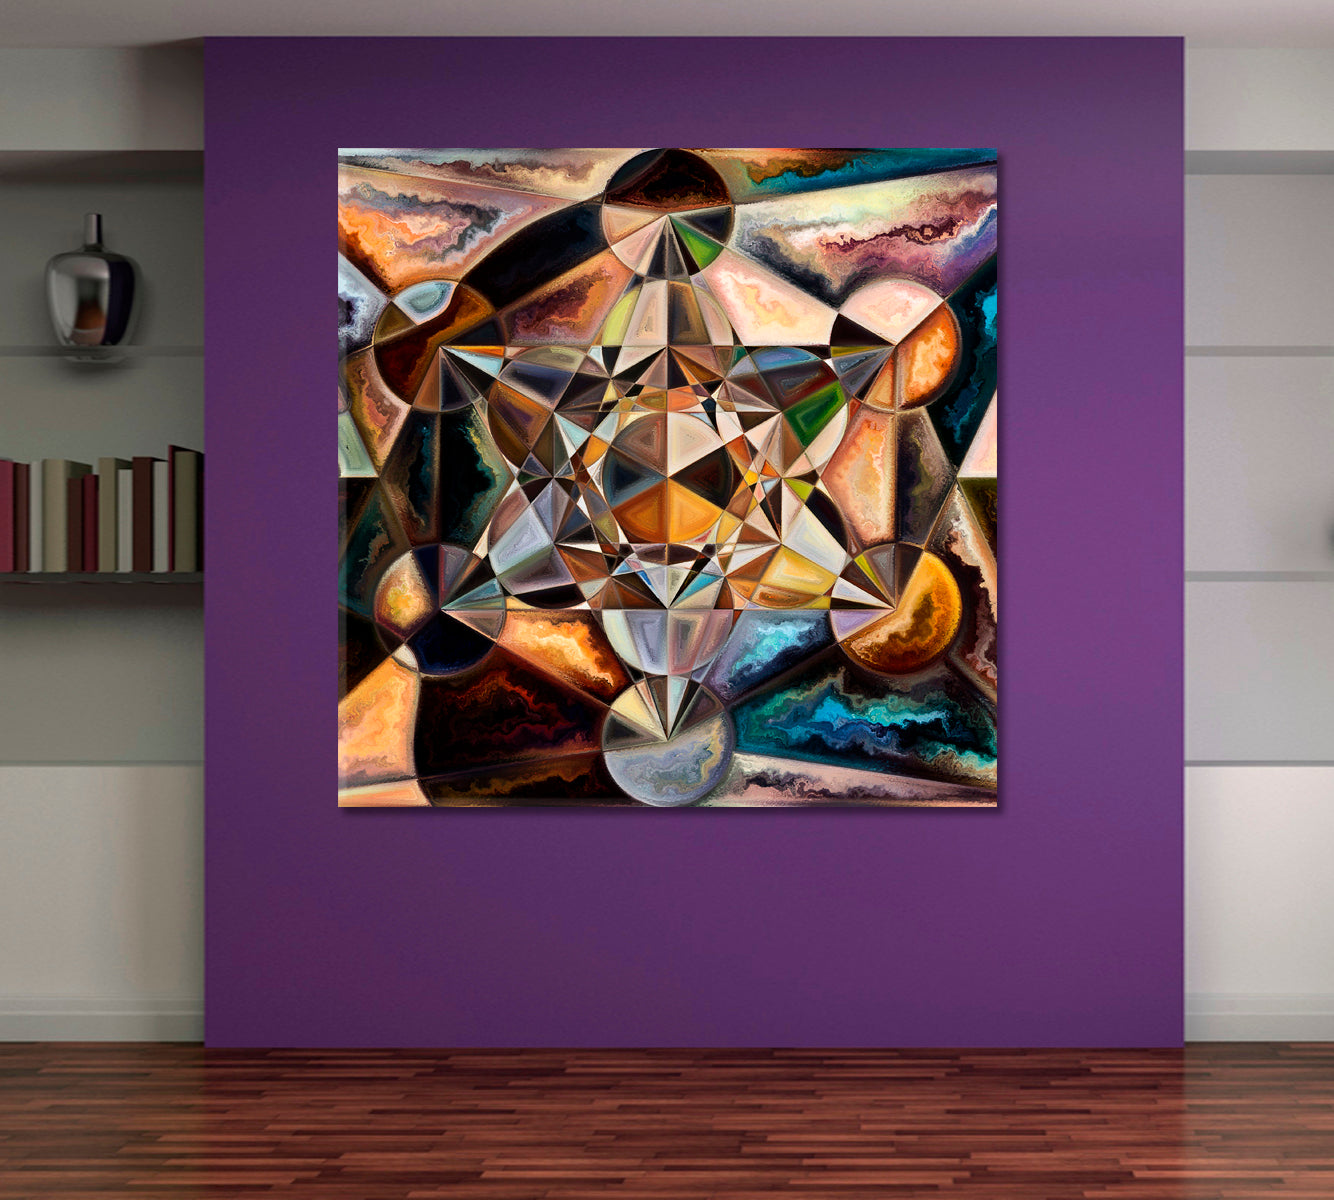 ABSTRACT GEOMETRIC FORMS Eye Catching Patterns - Square Panel Contemporary Art Artesty   